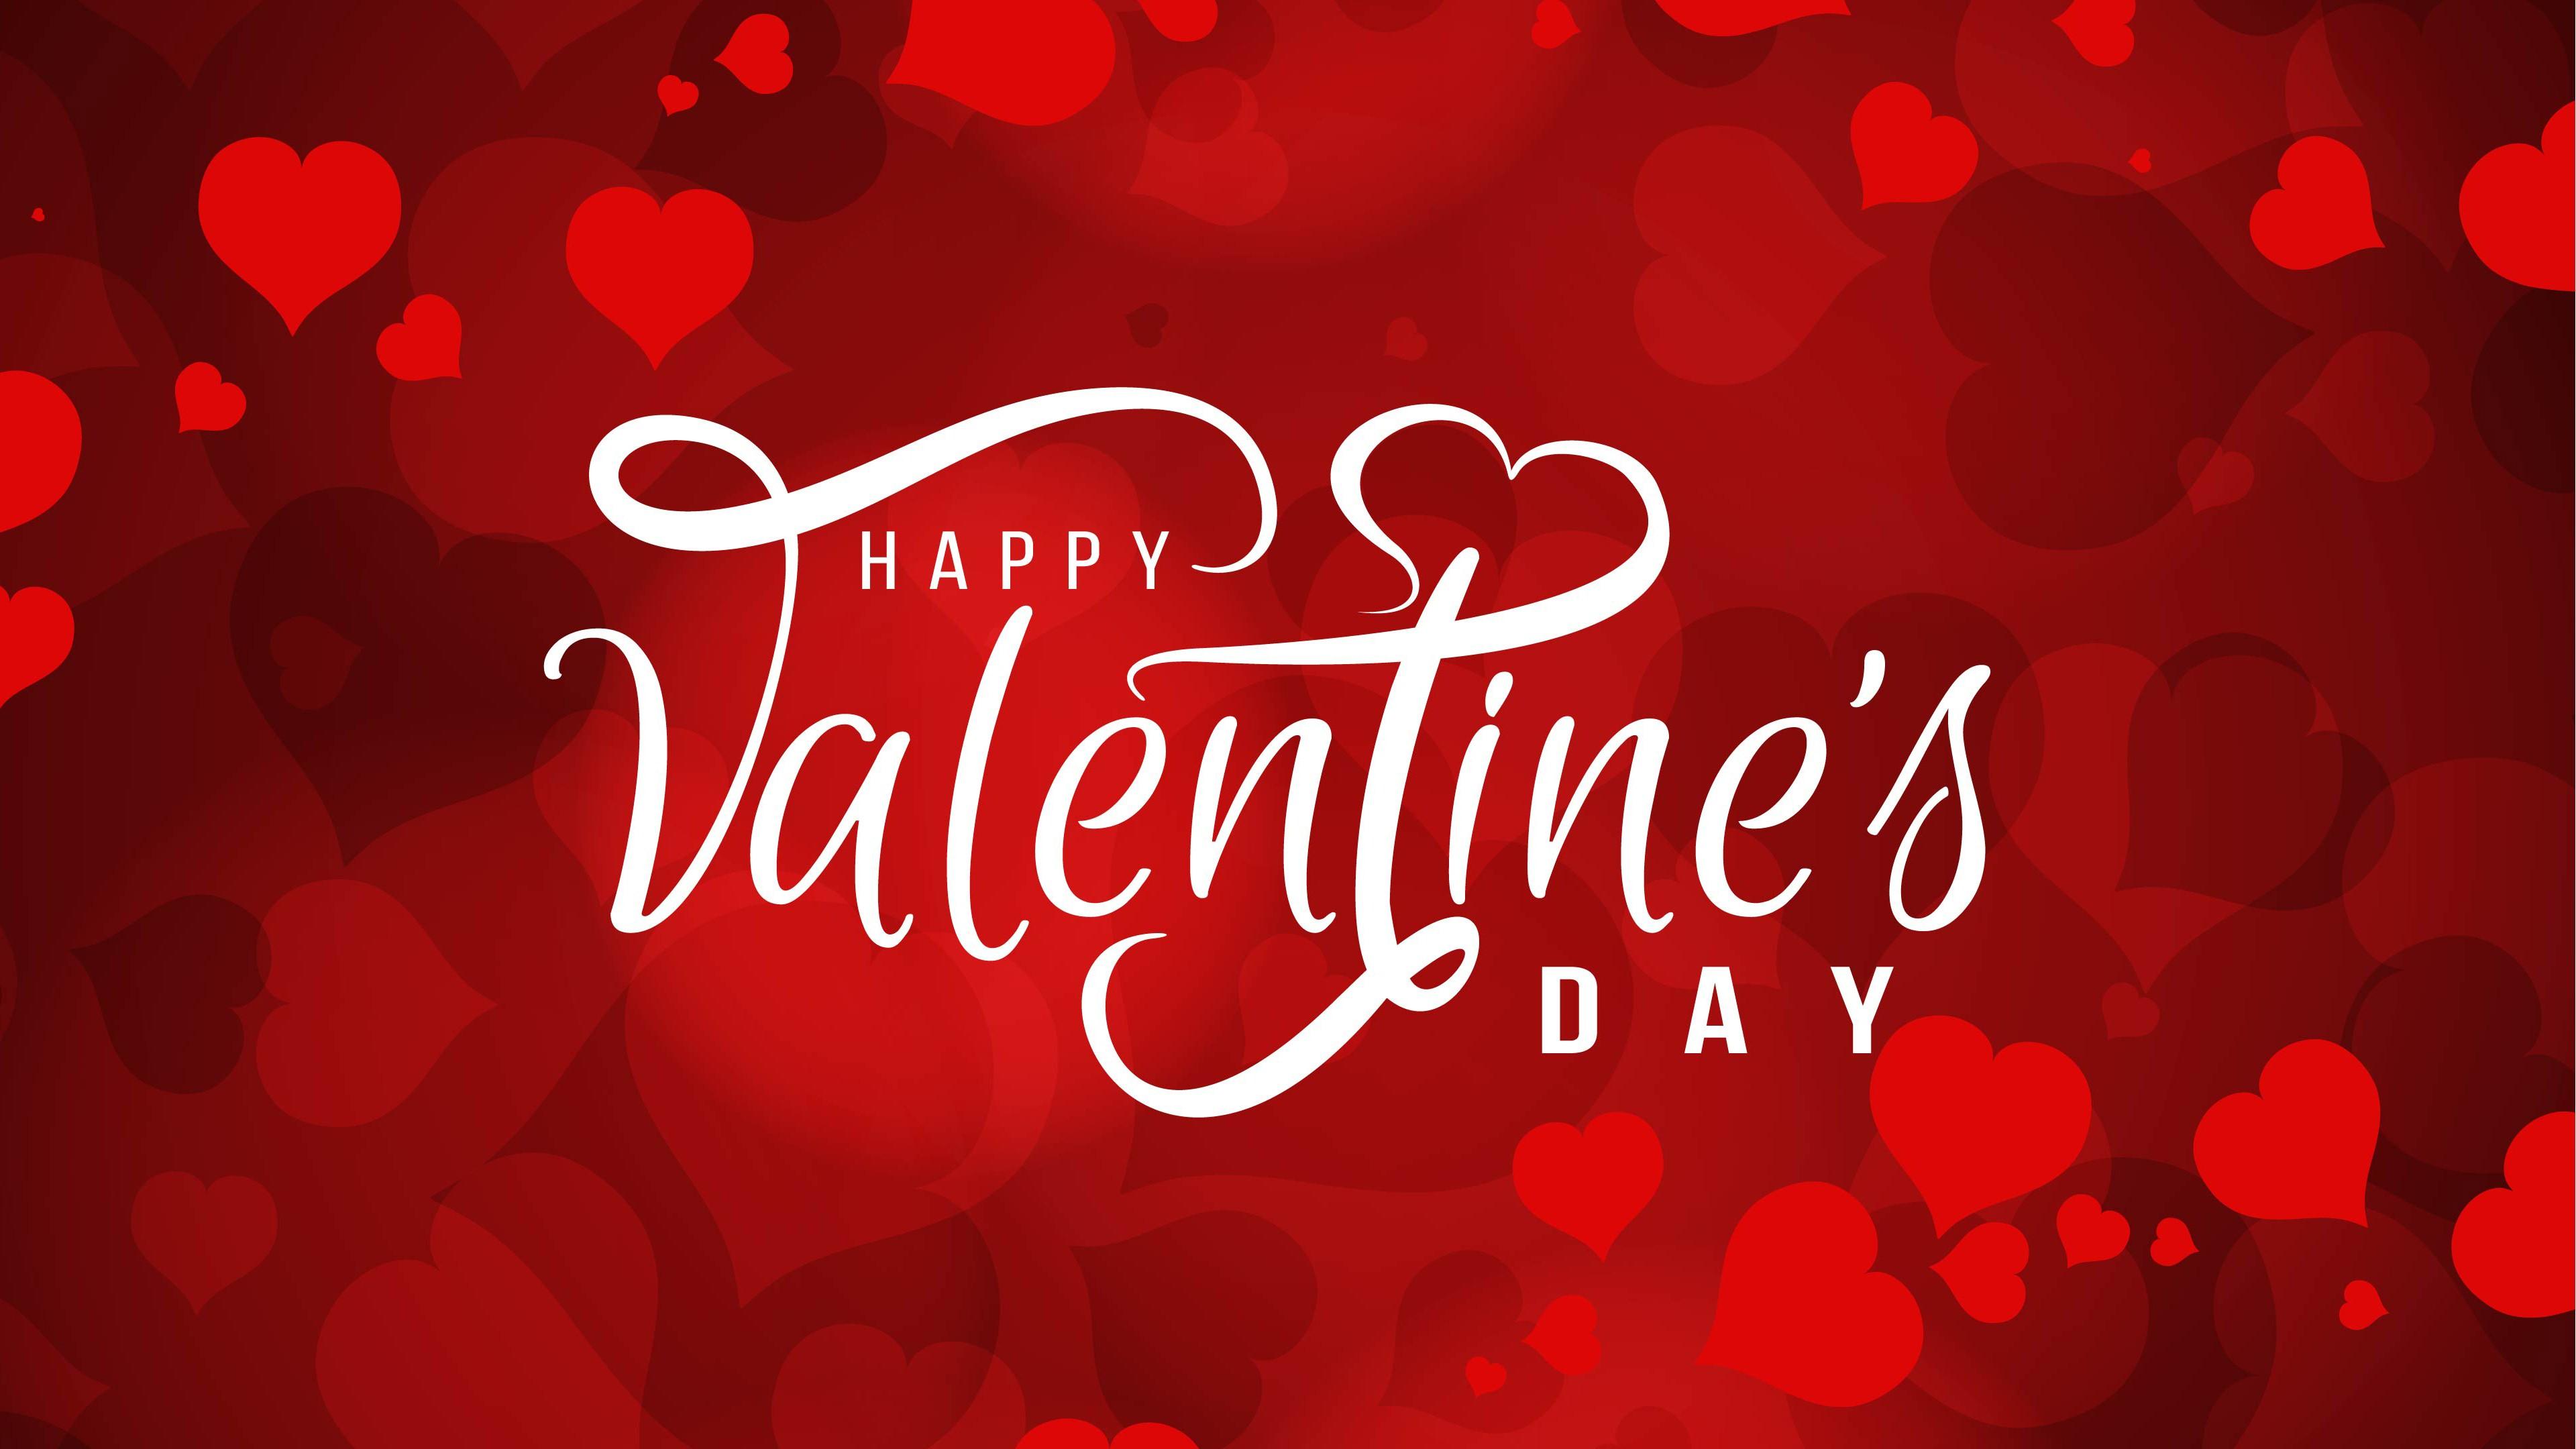 Beautiful Valentine Day 4K Wallpaper in Red Background. HD